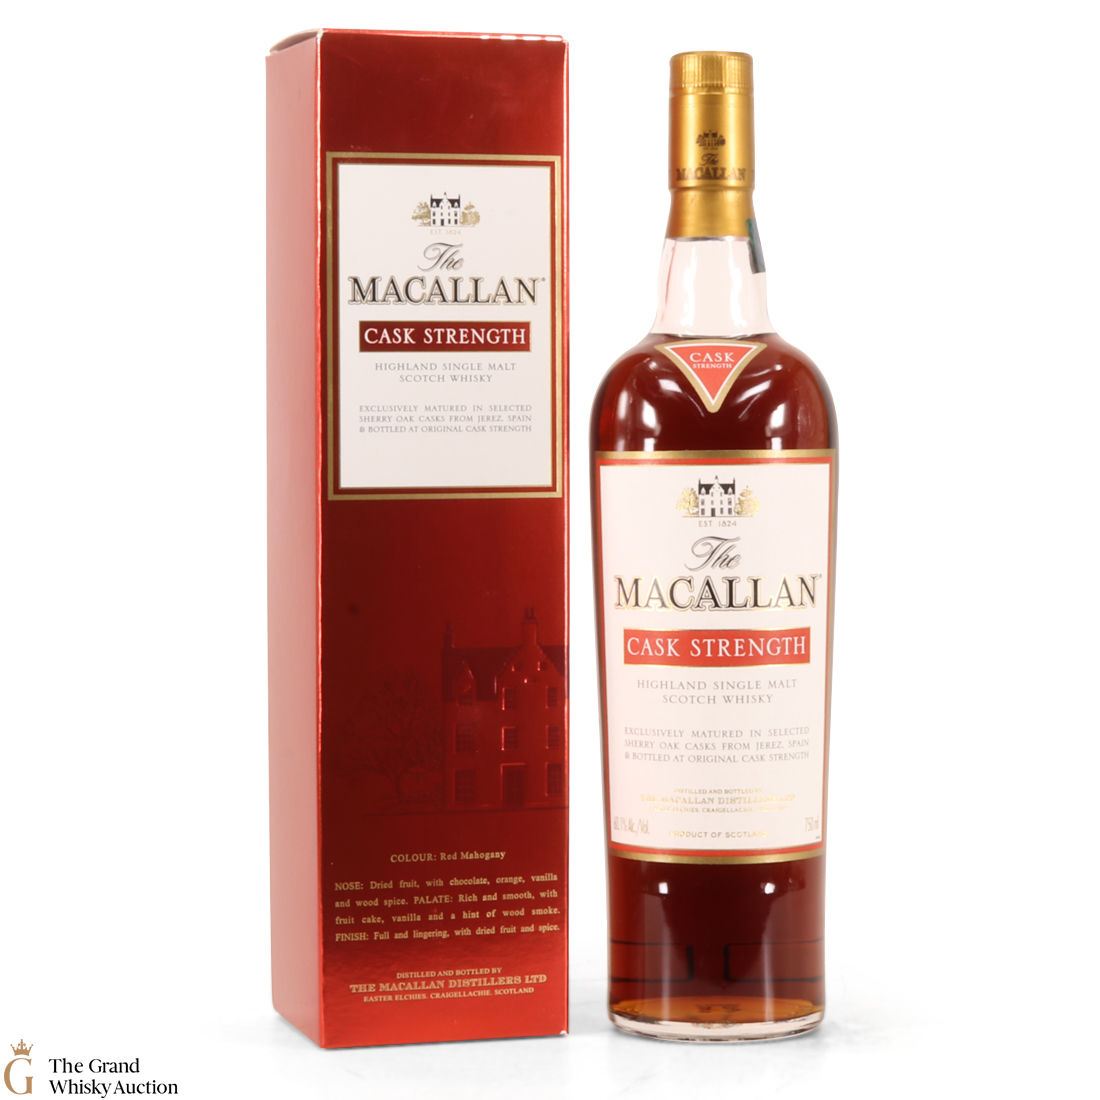 Macallan Cask Strength 60 1 75cl Auction The Grand Whisky Auction